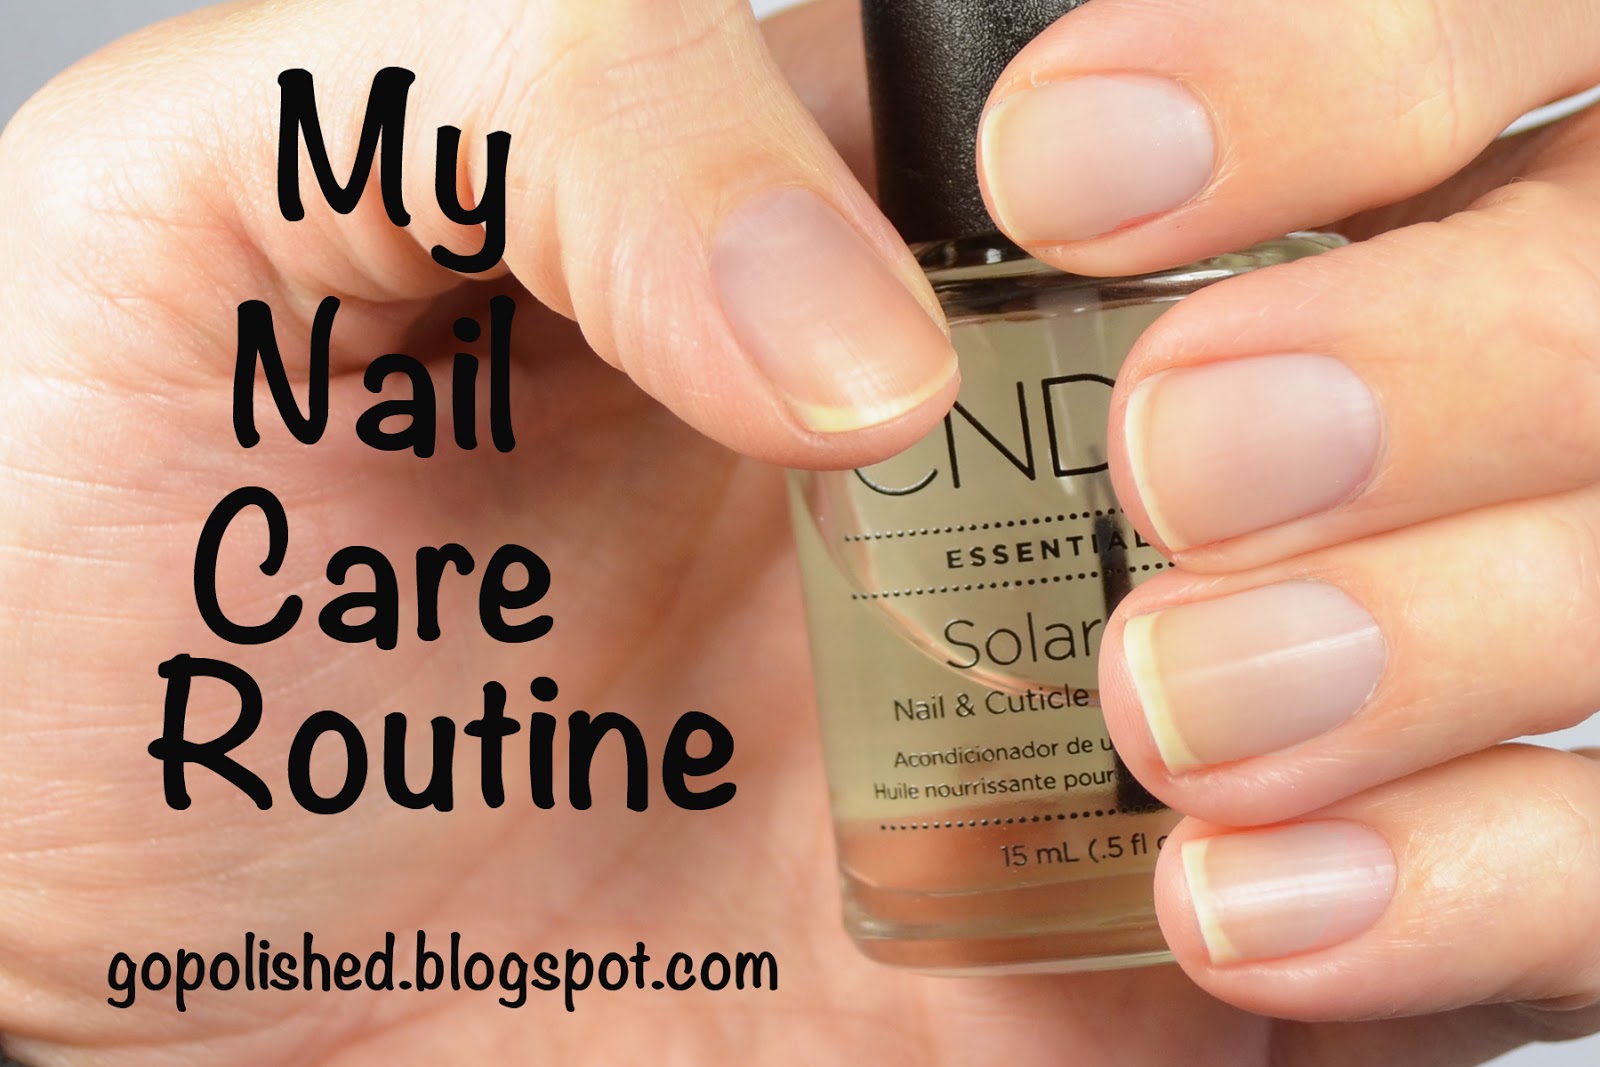 10. The Benefits of Using Coconut Milk in Your Nail Care Routine - wide 4